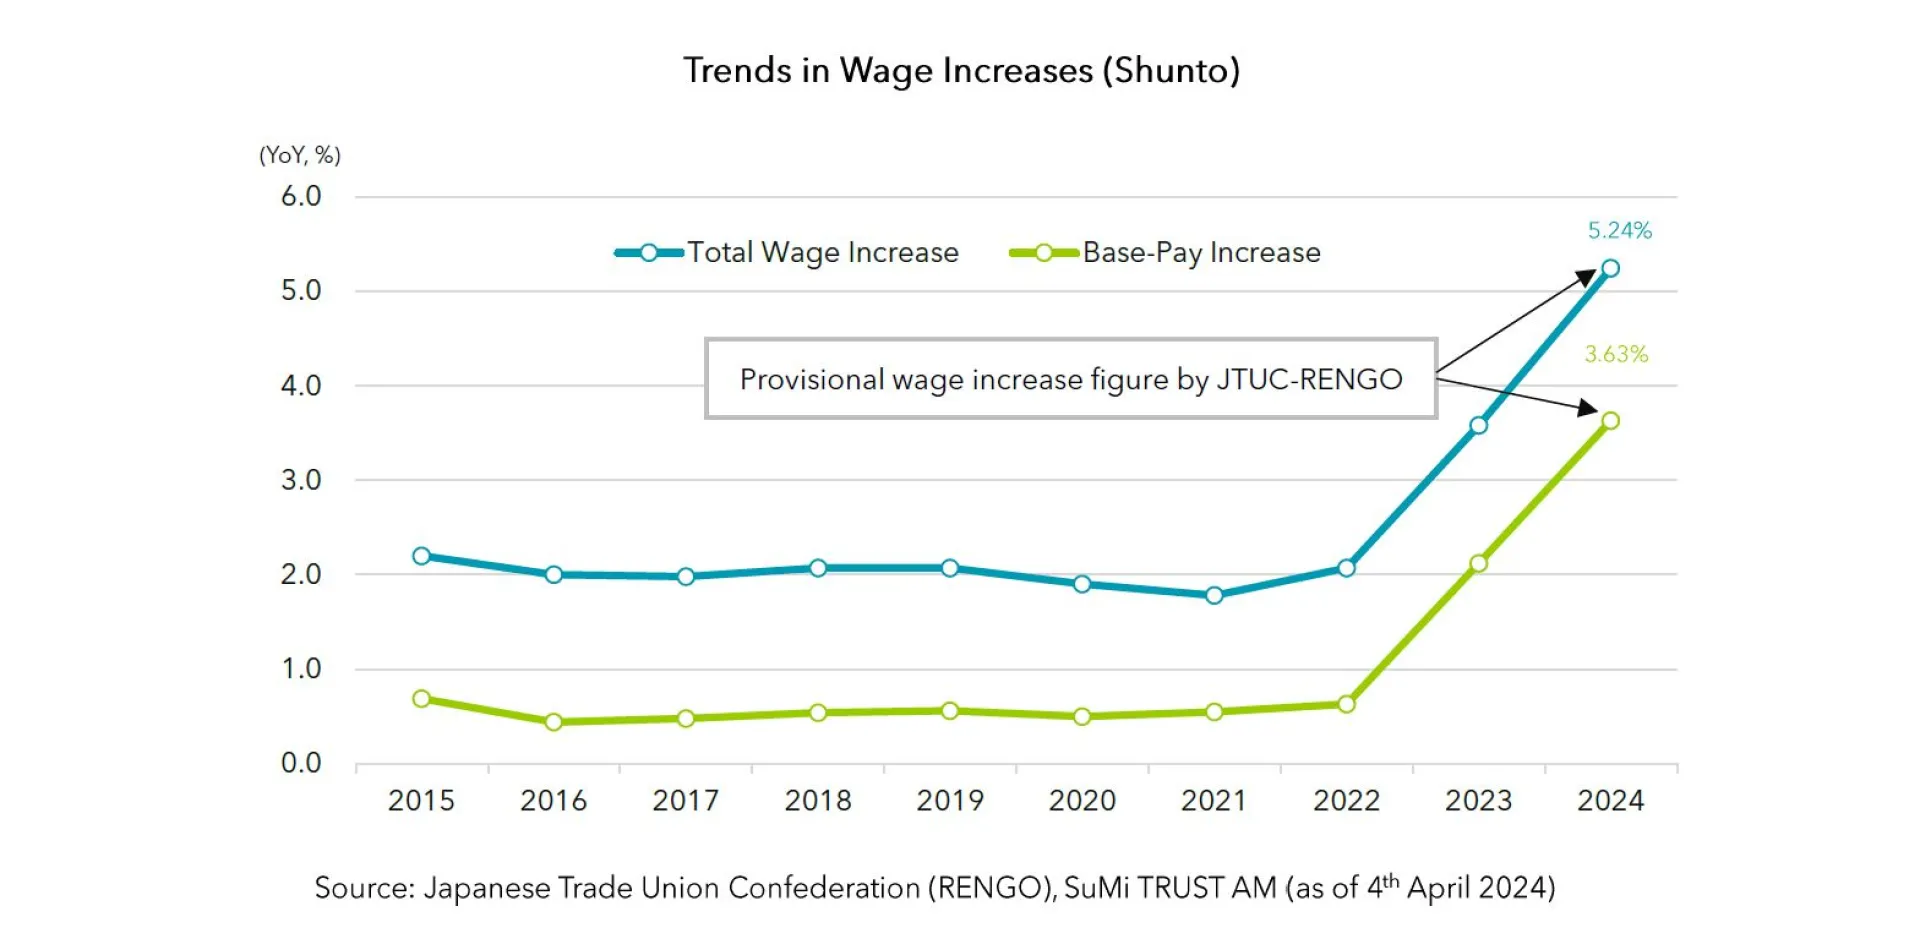 Trends in Wage Increases (Shunto)